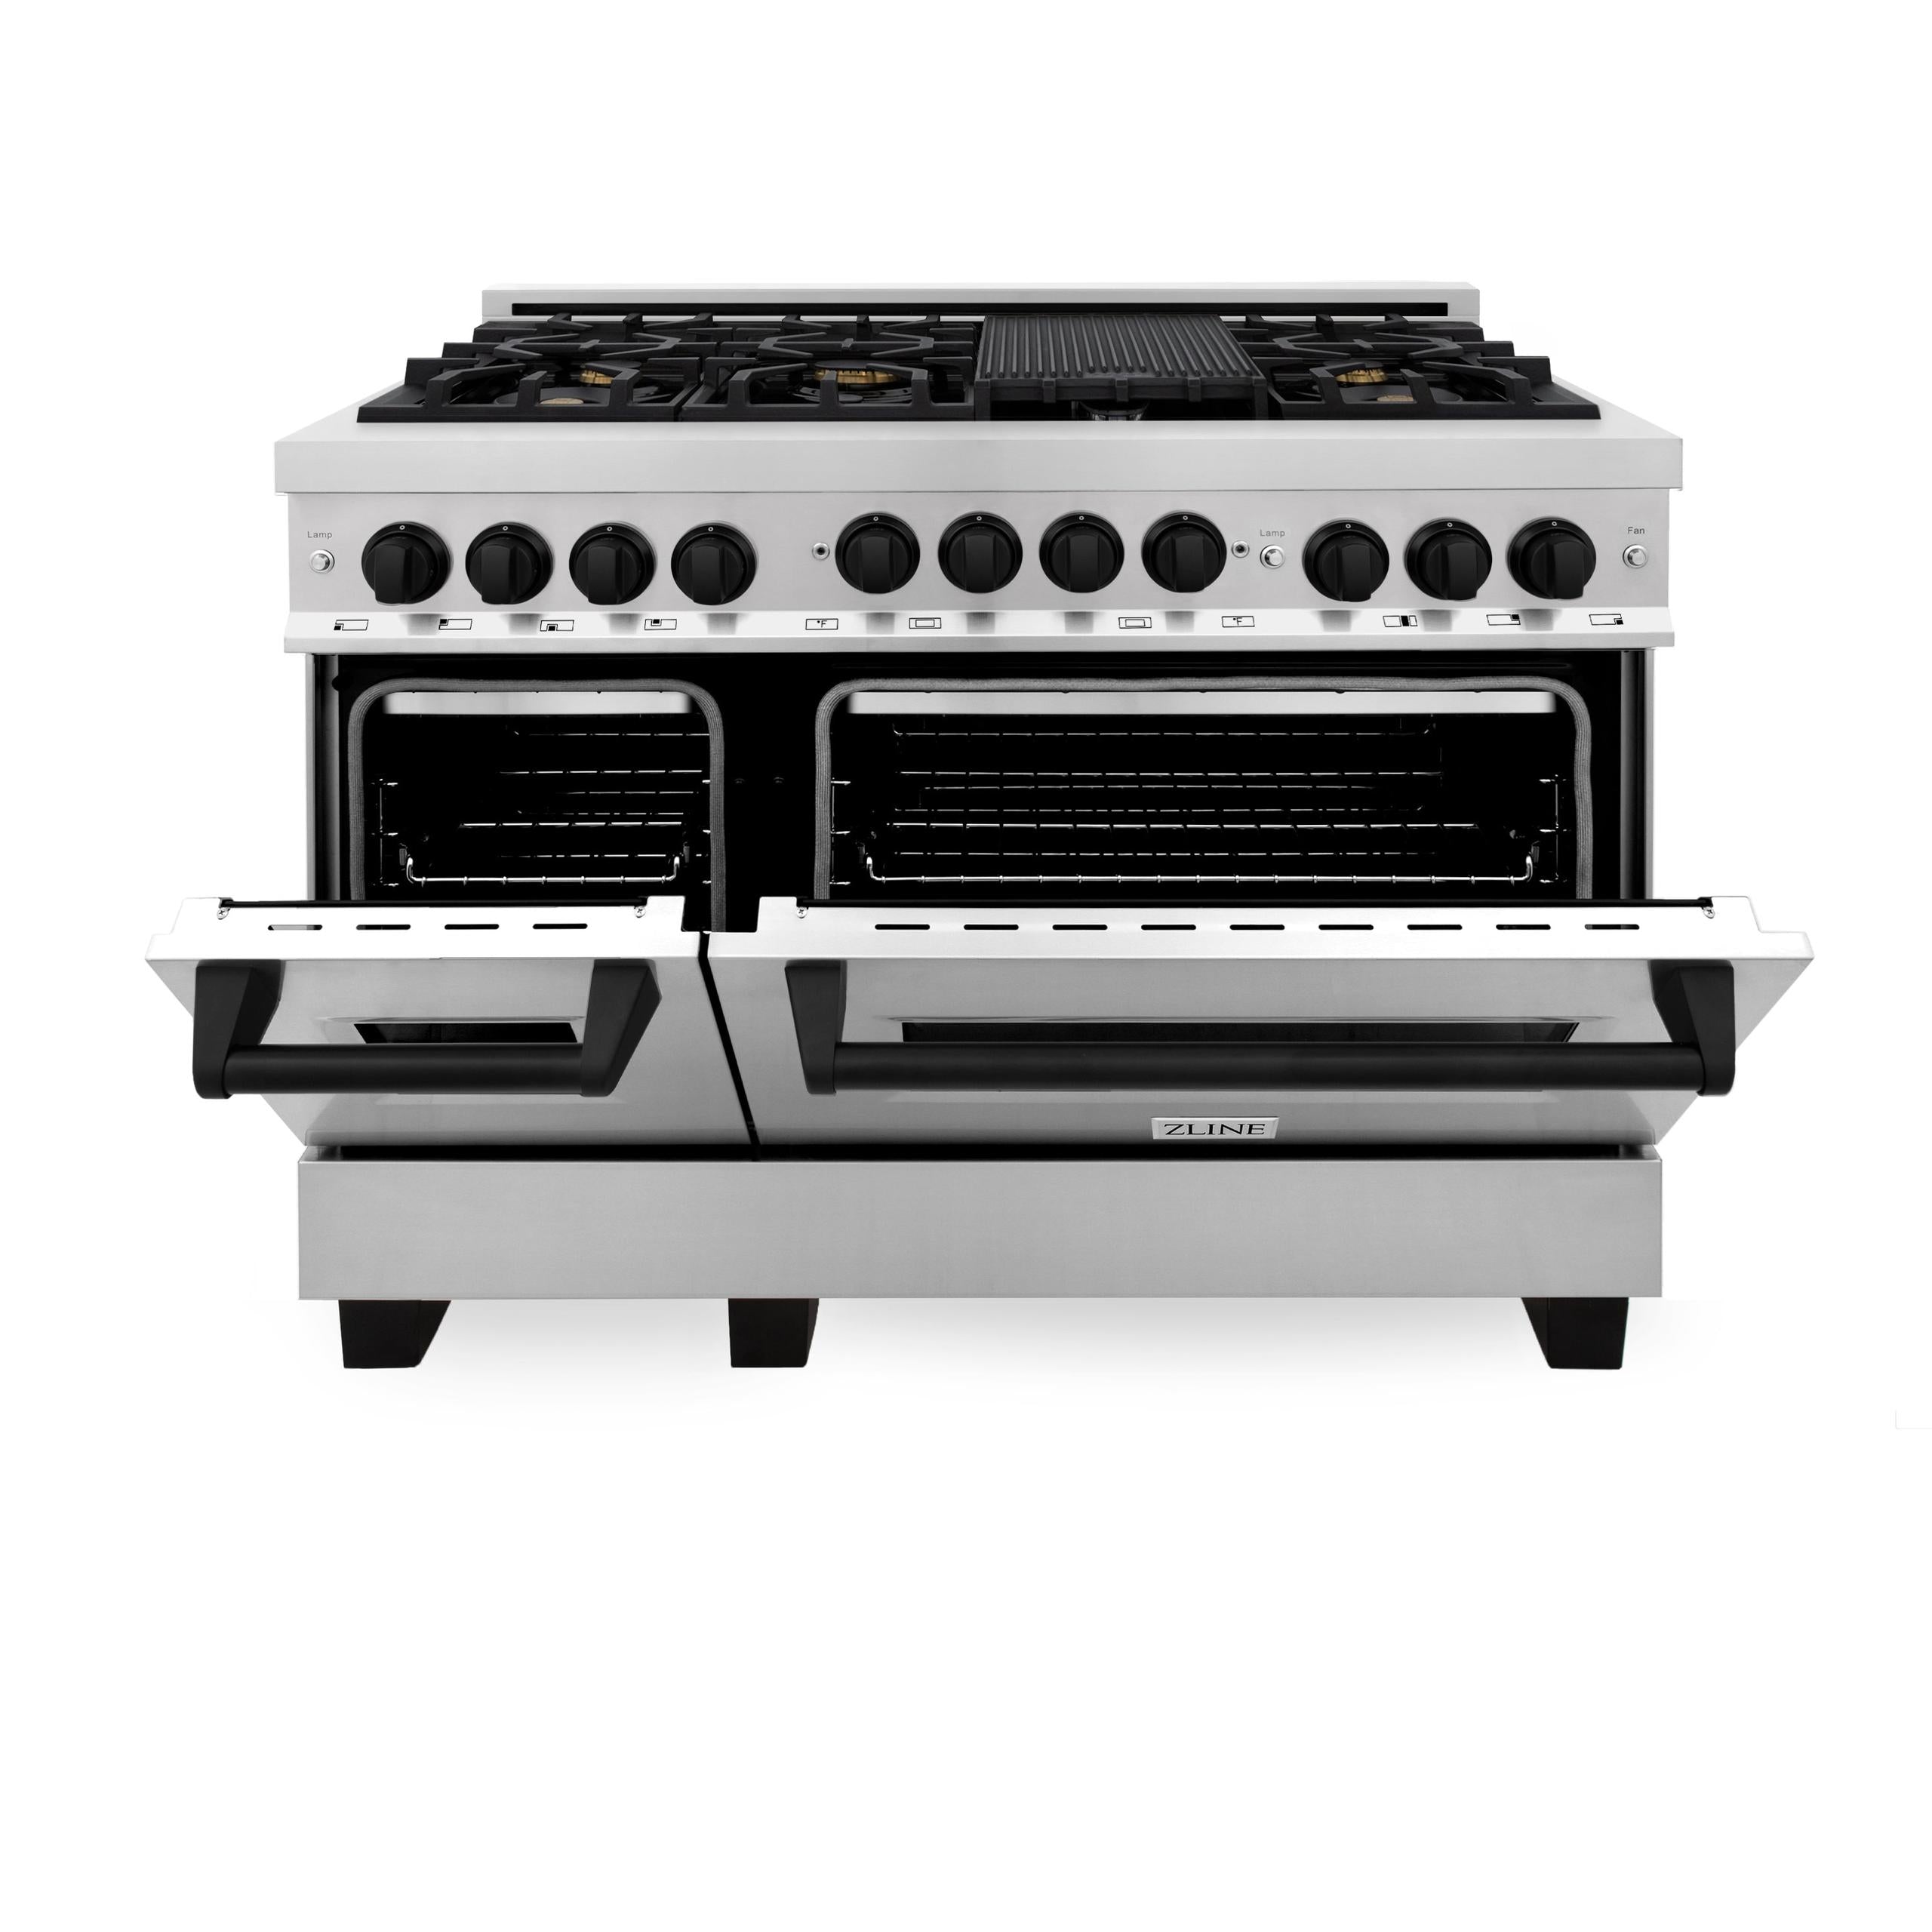 ZLINE KITCHEN AND BATH RGSZSN48MB ZLINE Autograph Edition 48" 6.0 cu. ft. Range with Gas Stove and Gas Oven in DuraSnow R Stainless Steel with Accents Color: Matte Black